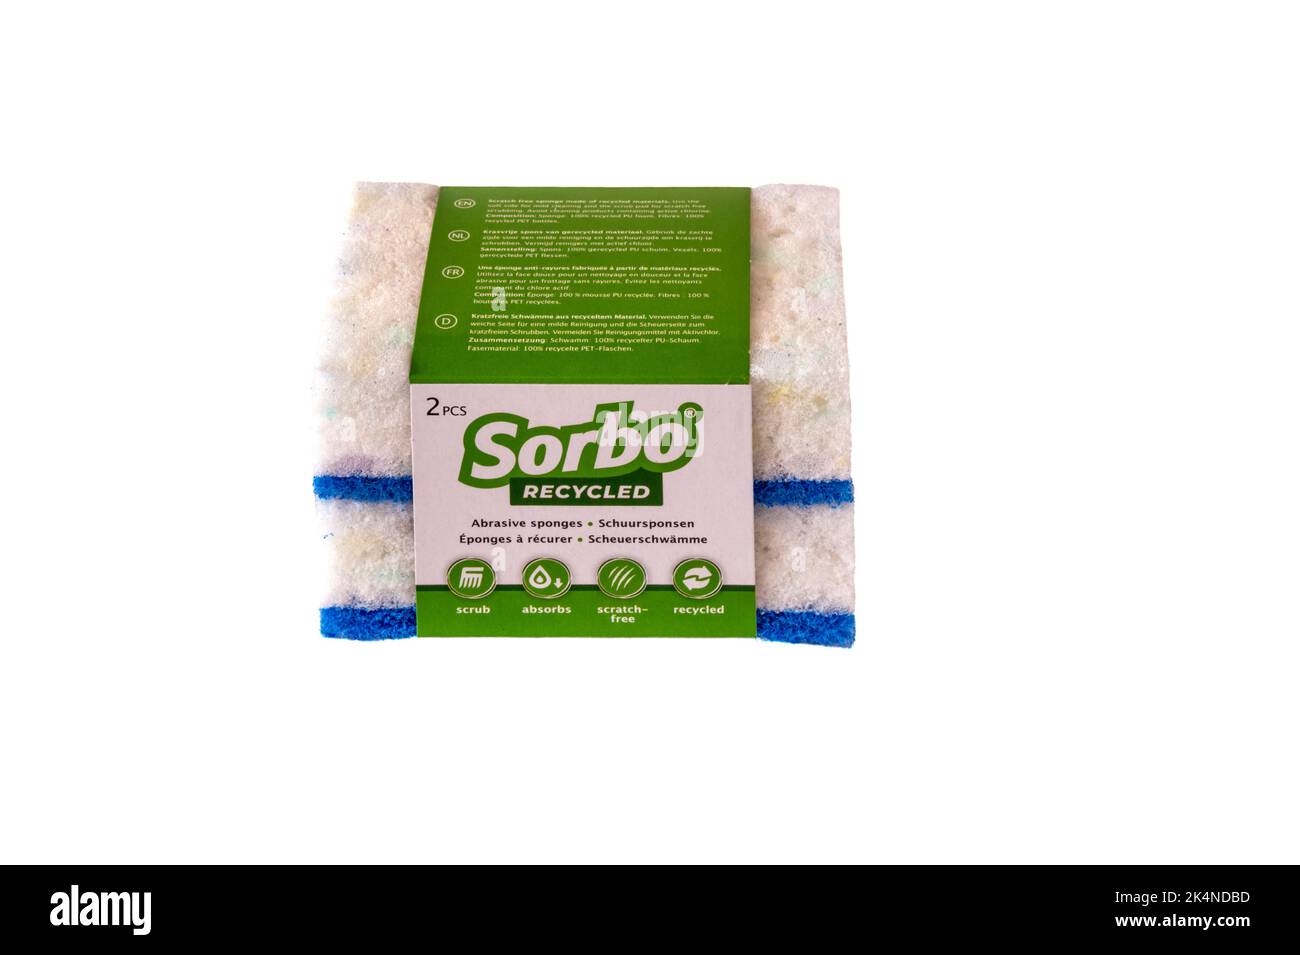 Sorbo scratch-free sponge made from recycled materials. Stock Photo